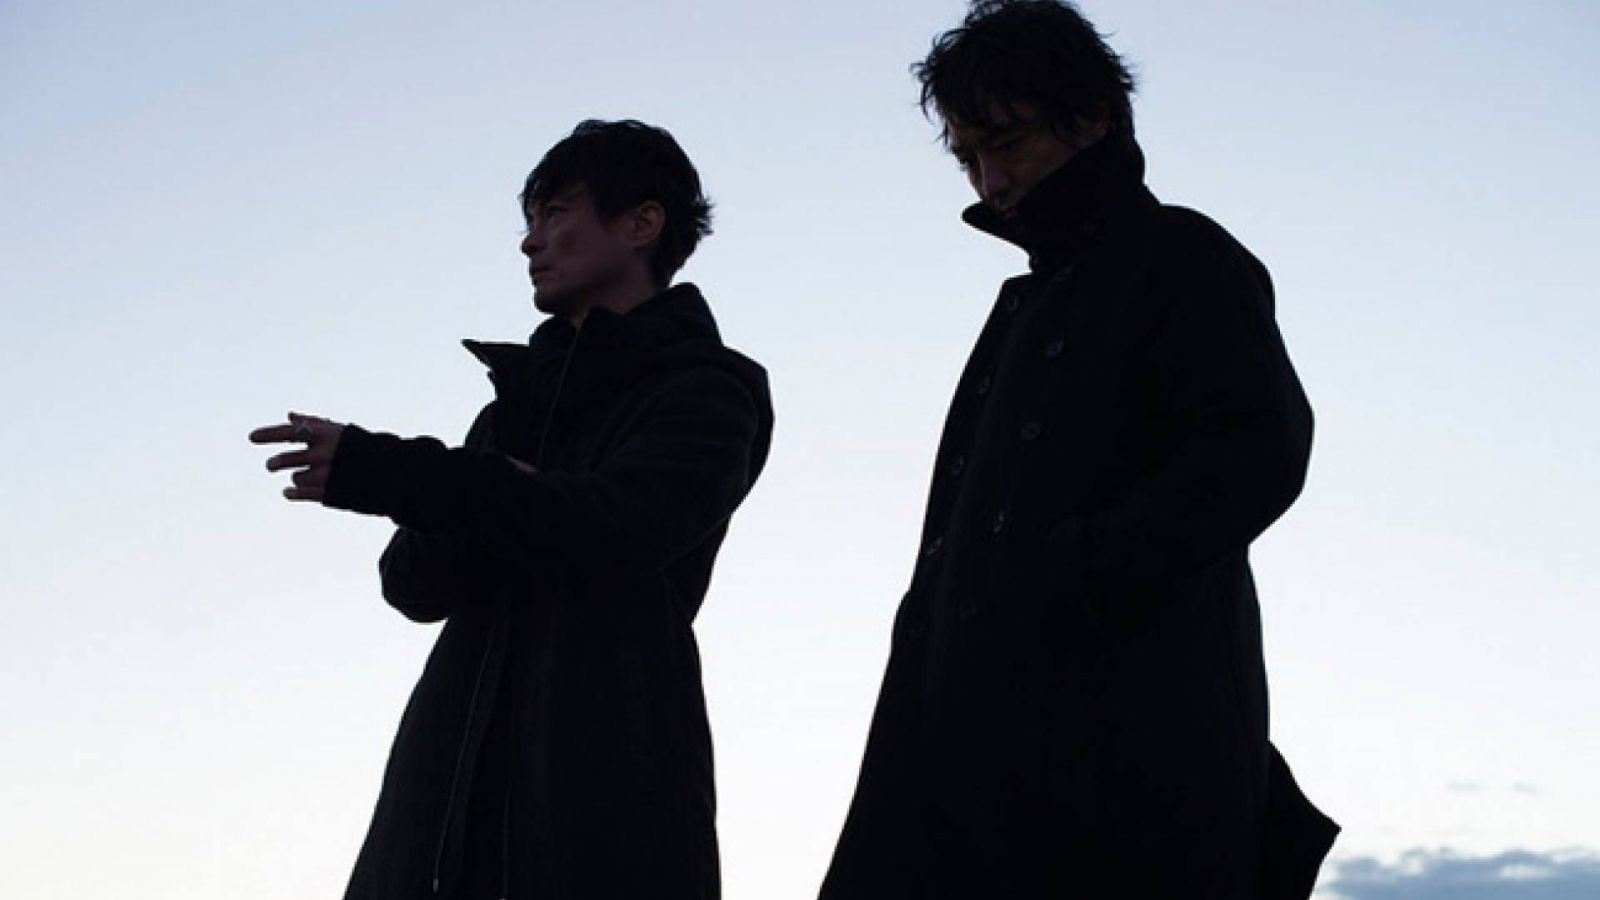 Best-of Compilation from BOOM BOOM SATELLITES © BOOM BOOM SATELLITES. All rights reserved.